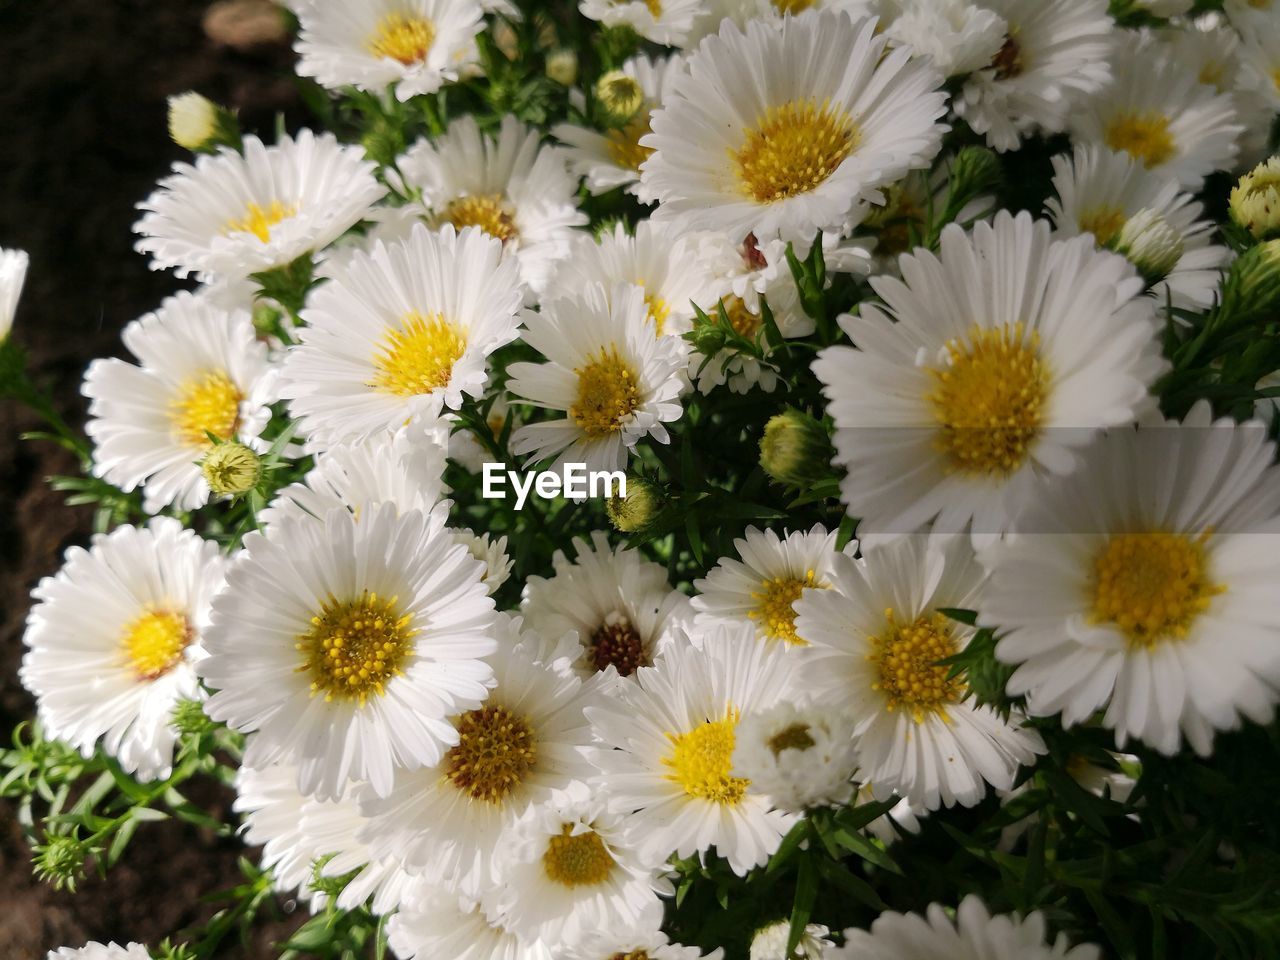 flower, flowering plant, plant, freshness, beauty in nature, fragility, flower head, white, petal, inflorescence, close-up, daisy, growth, nature, no people, chrysanths, tanacetum parthenium, yellow, pollen, high angle view, outdoors, floristry, day, botany, springtime